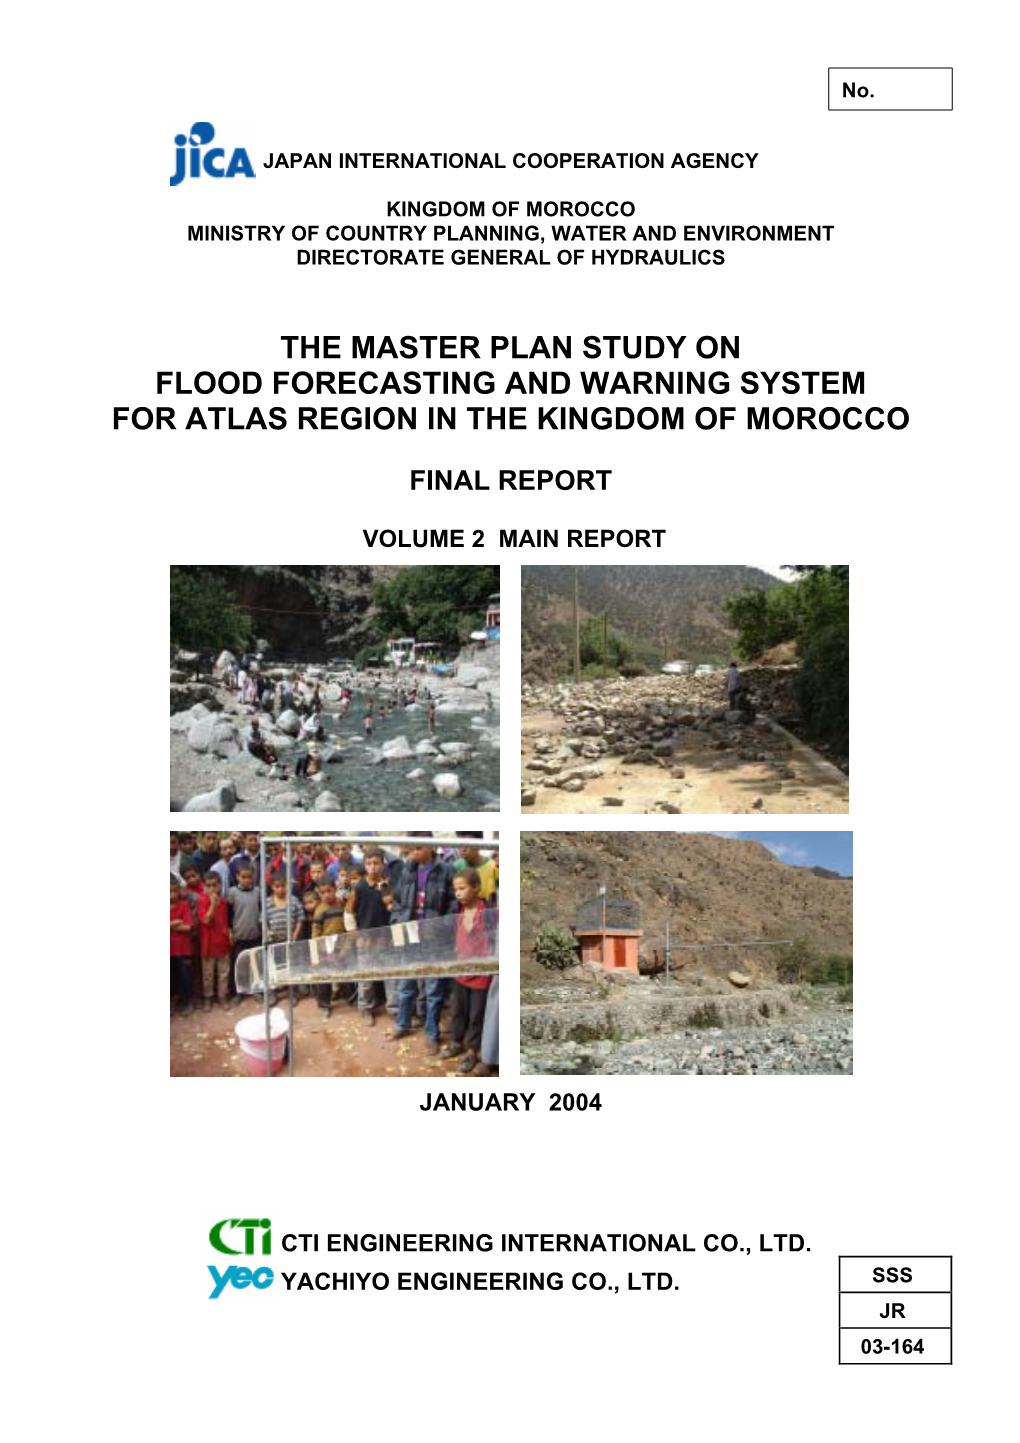 The Master Plan Study on Flood Forecasting and Warning System for Atlas Region in the Kingdom of Morocco